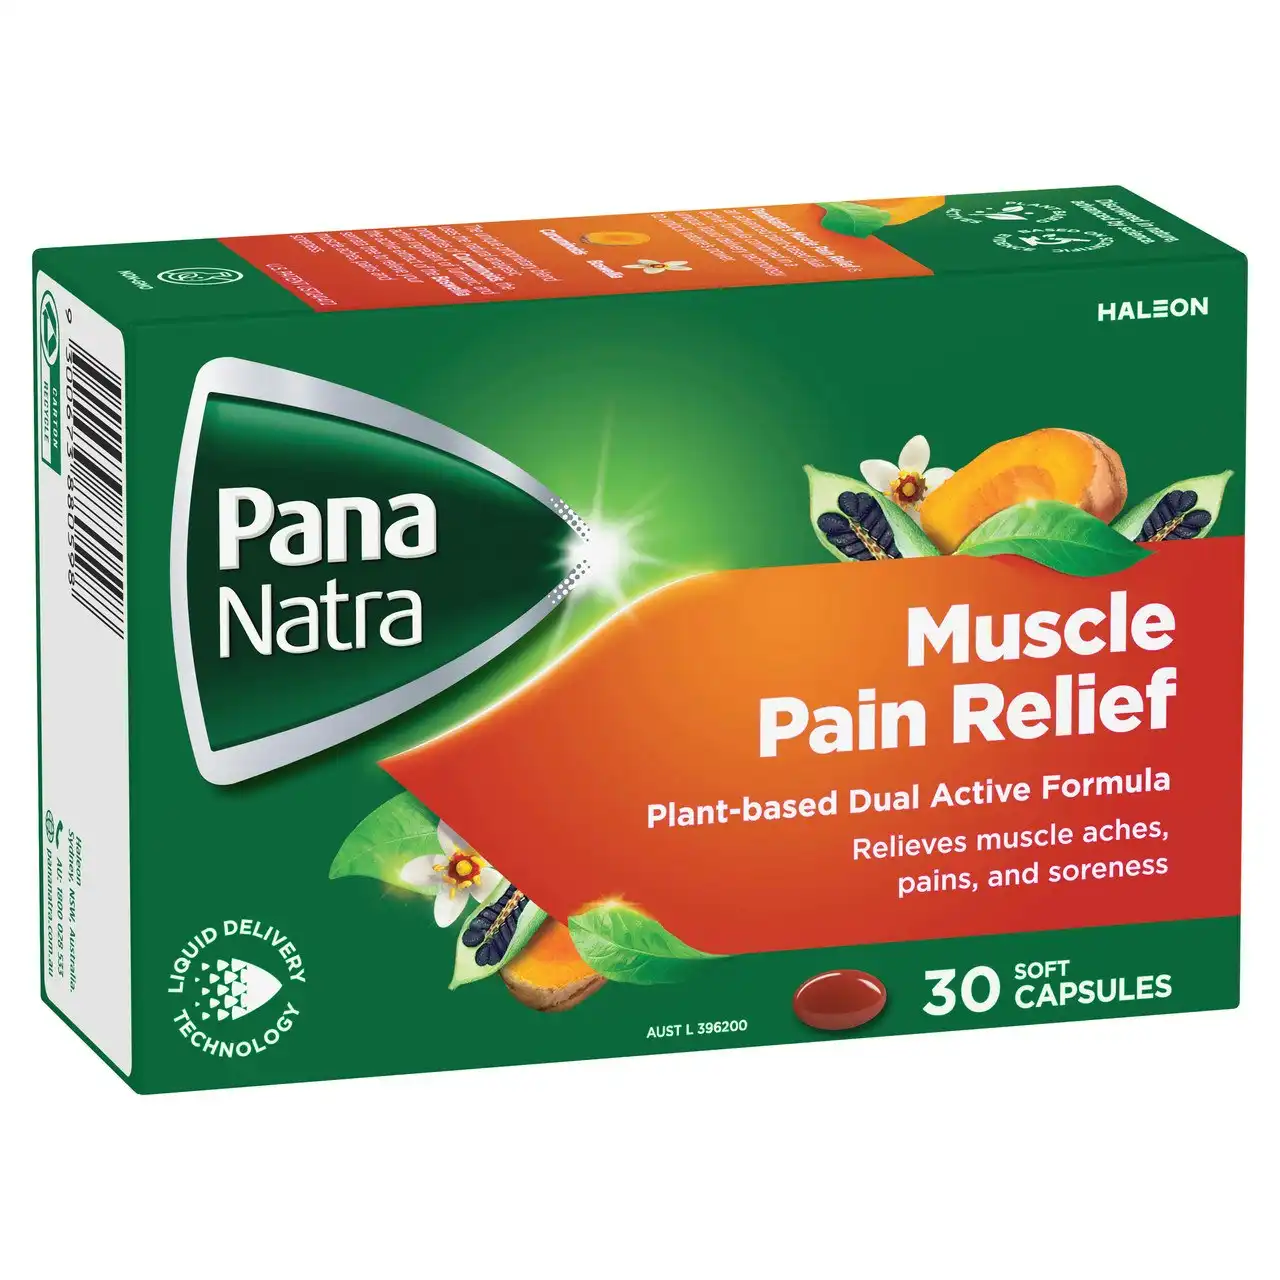 Pana Natra Muscle Pain Relief 30 soft capsules